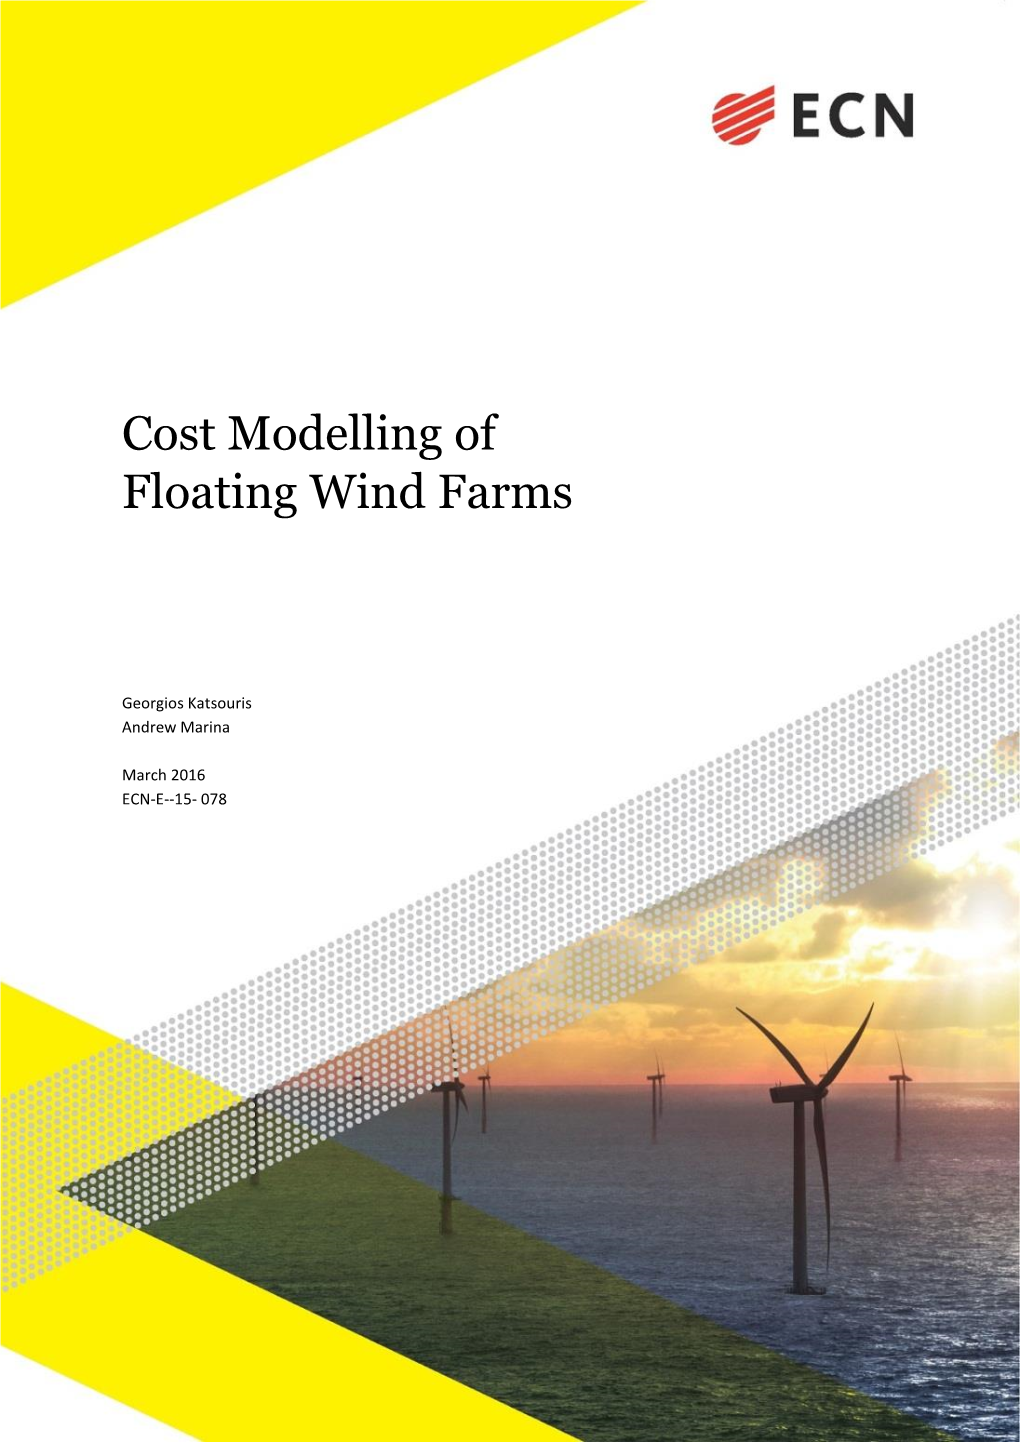 Cost Modelling of Floating Wind Farms